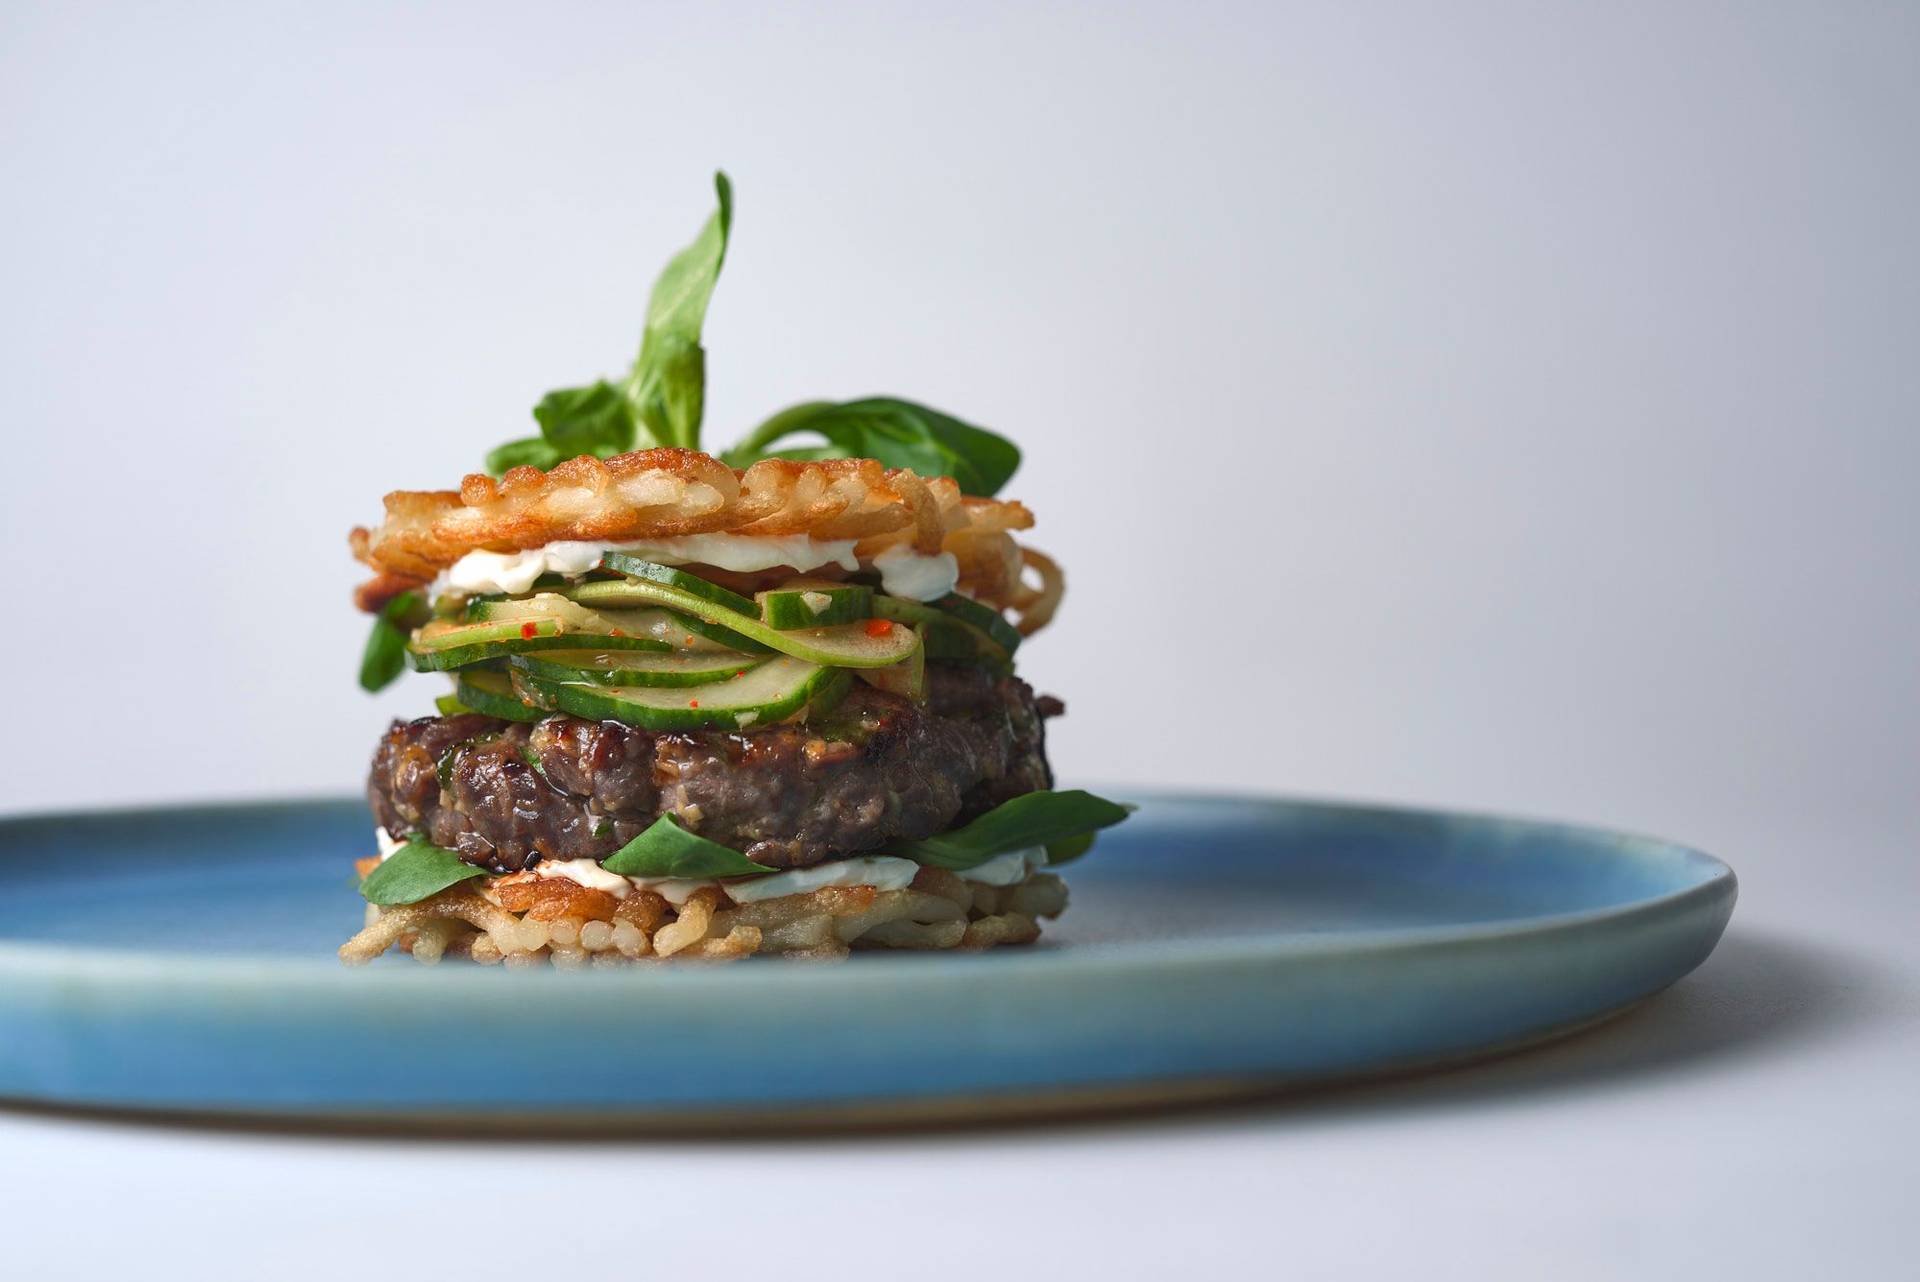 bulgogi beef burger with cucumber kimchi and udon noodle buns on a blue ceramic plate with white background